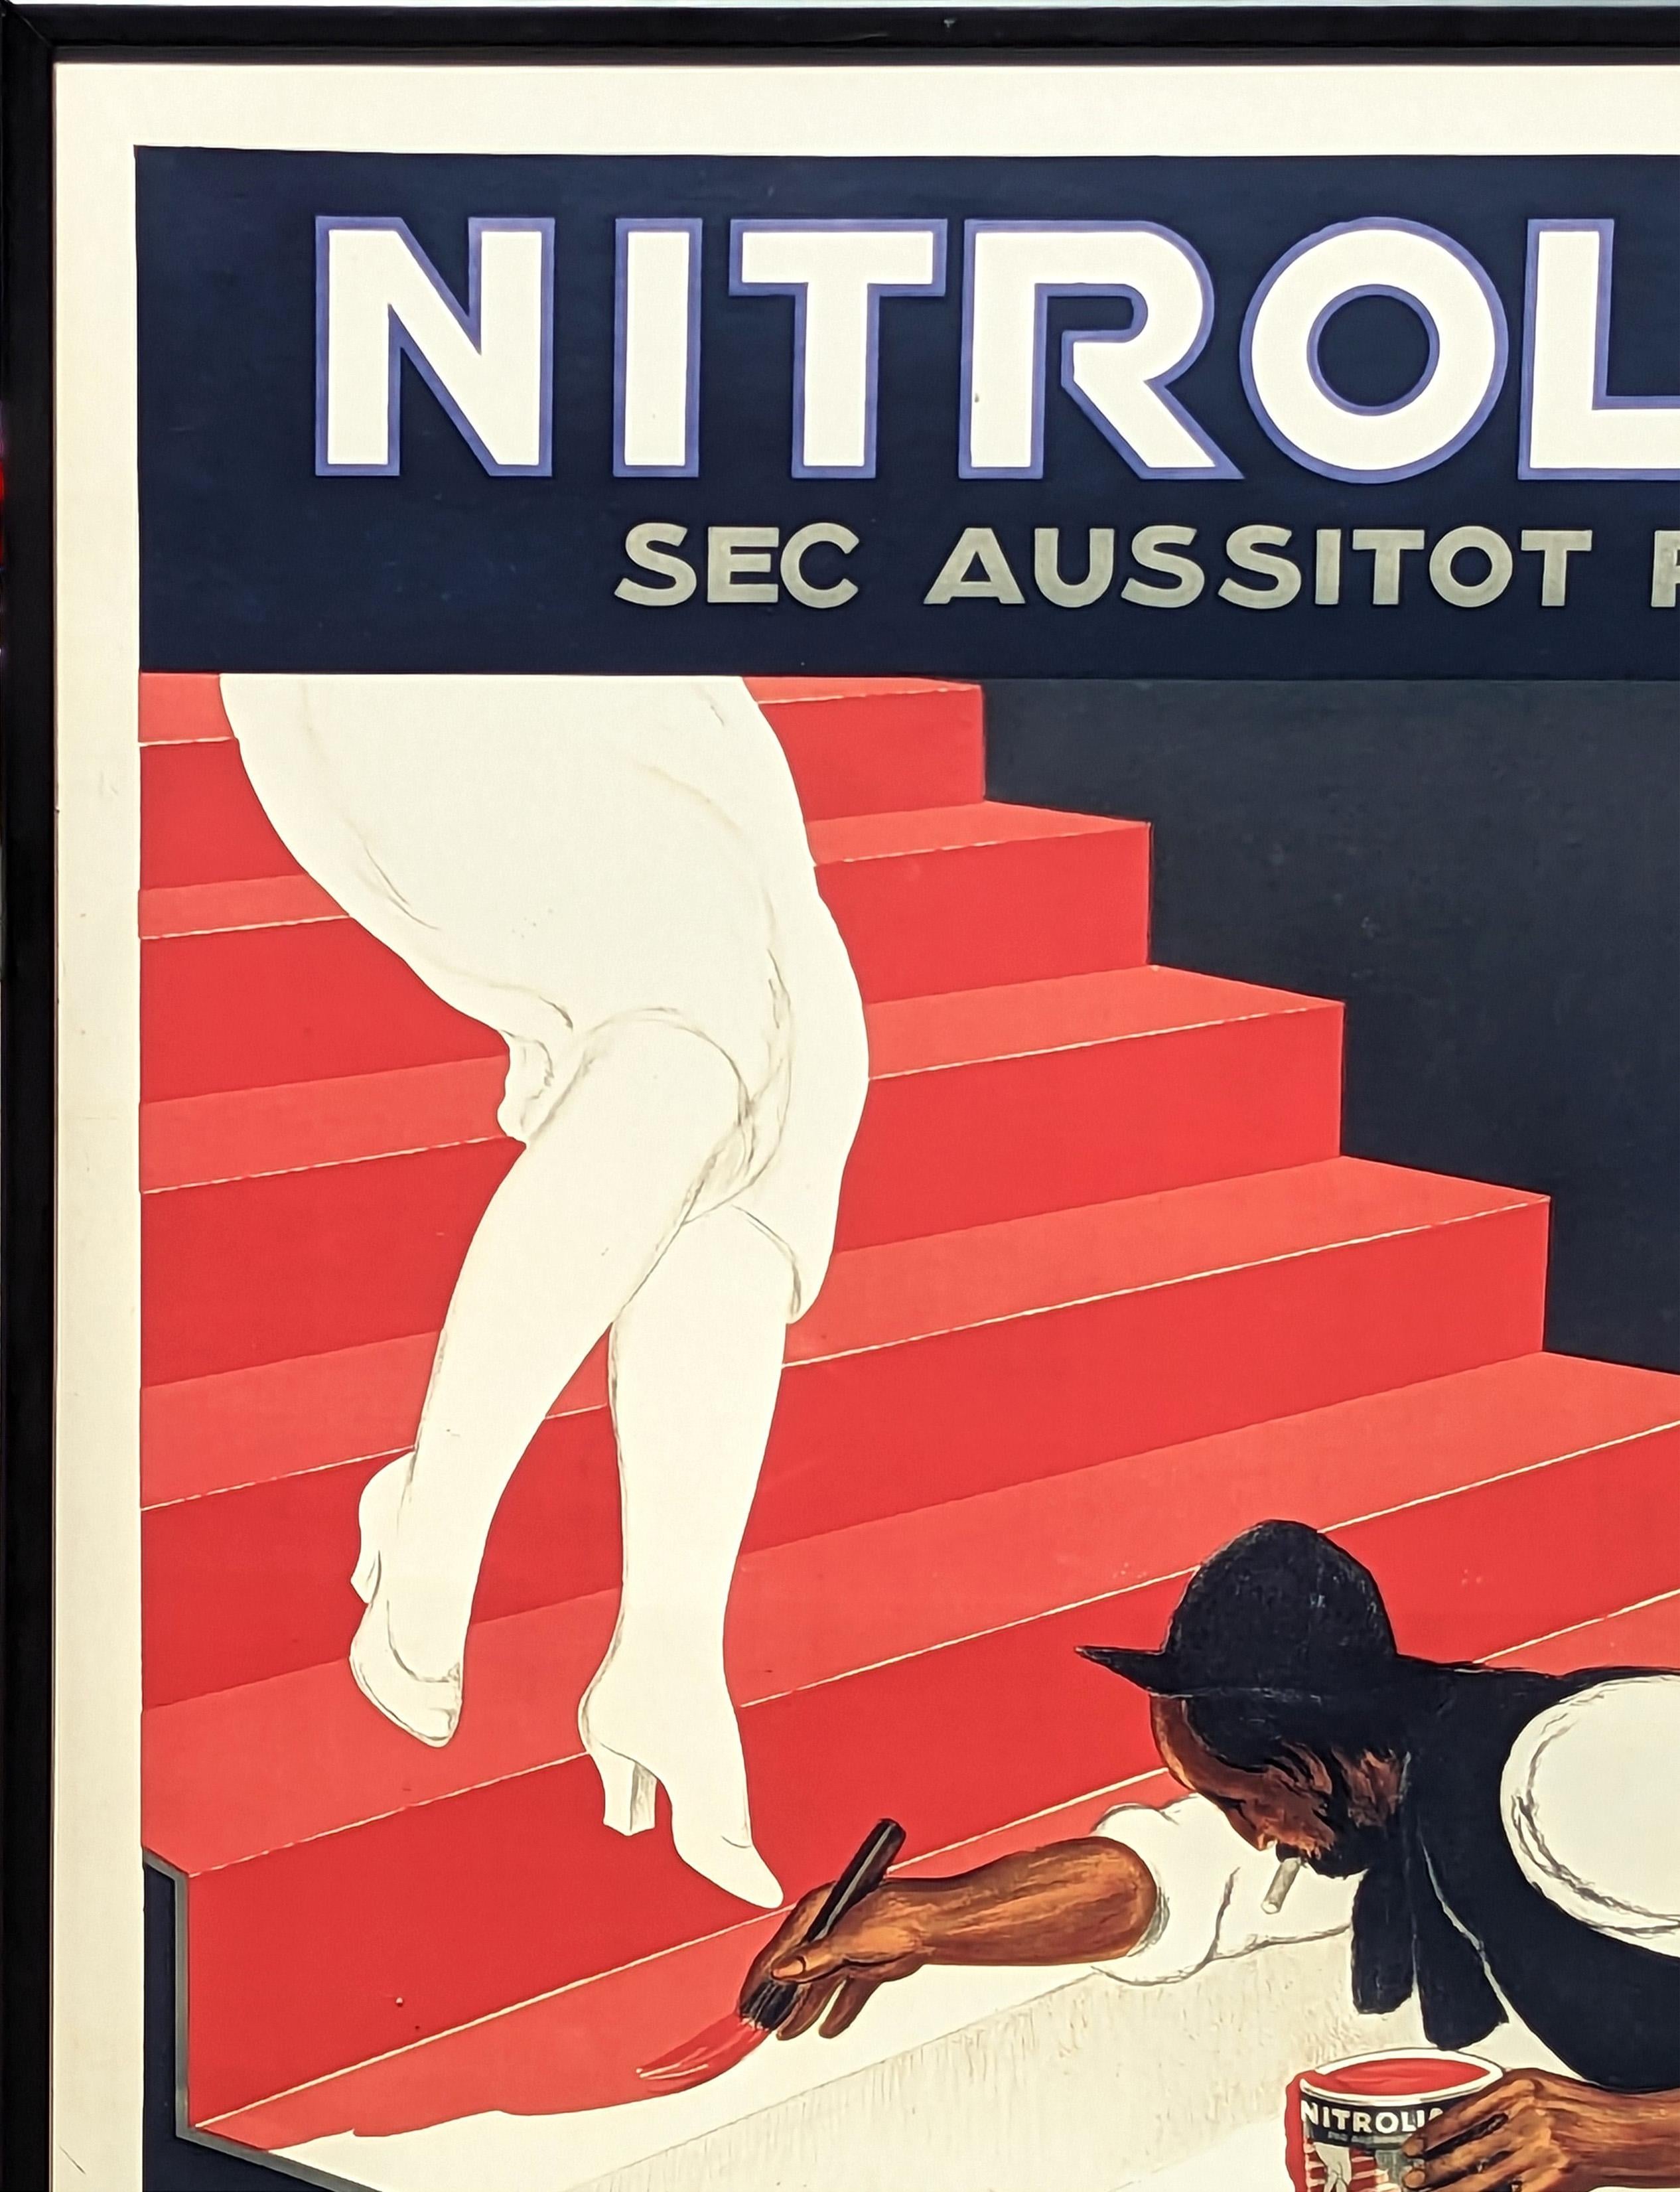 Modern art deco promotional poster by artist and illustrator Leonetto Cappiello. The work features a  man using Nitrolian paint to paint a set of stairs as a woman walks down. The paint dries so fast that the woman doesn't get any paint on her.